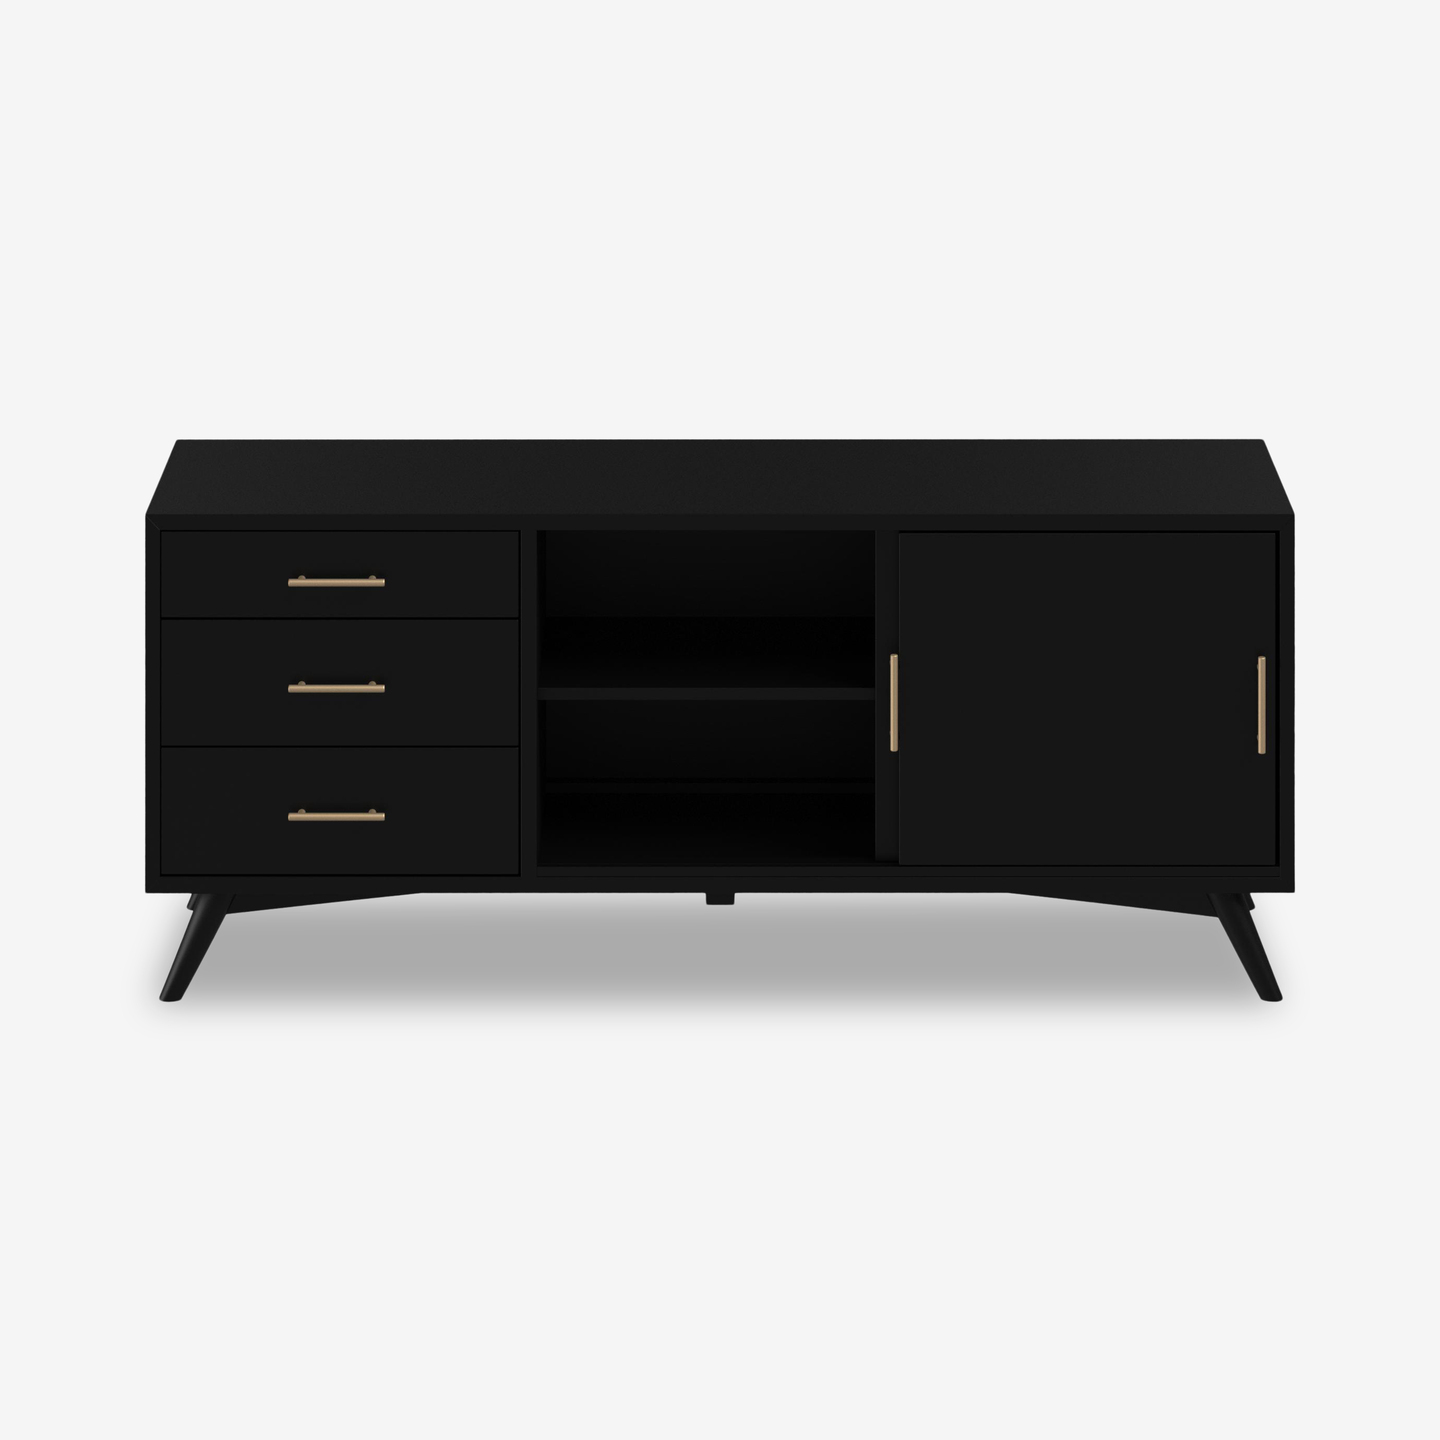 1101_Cheney-Media-Console-Extended-Black_Front